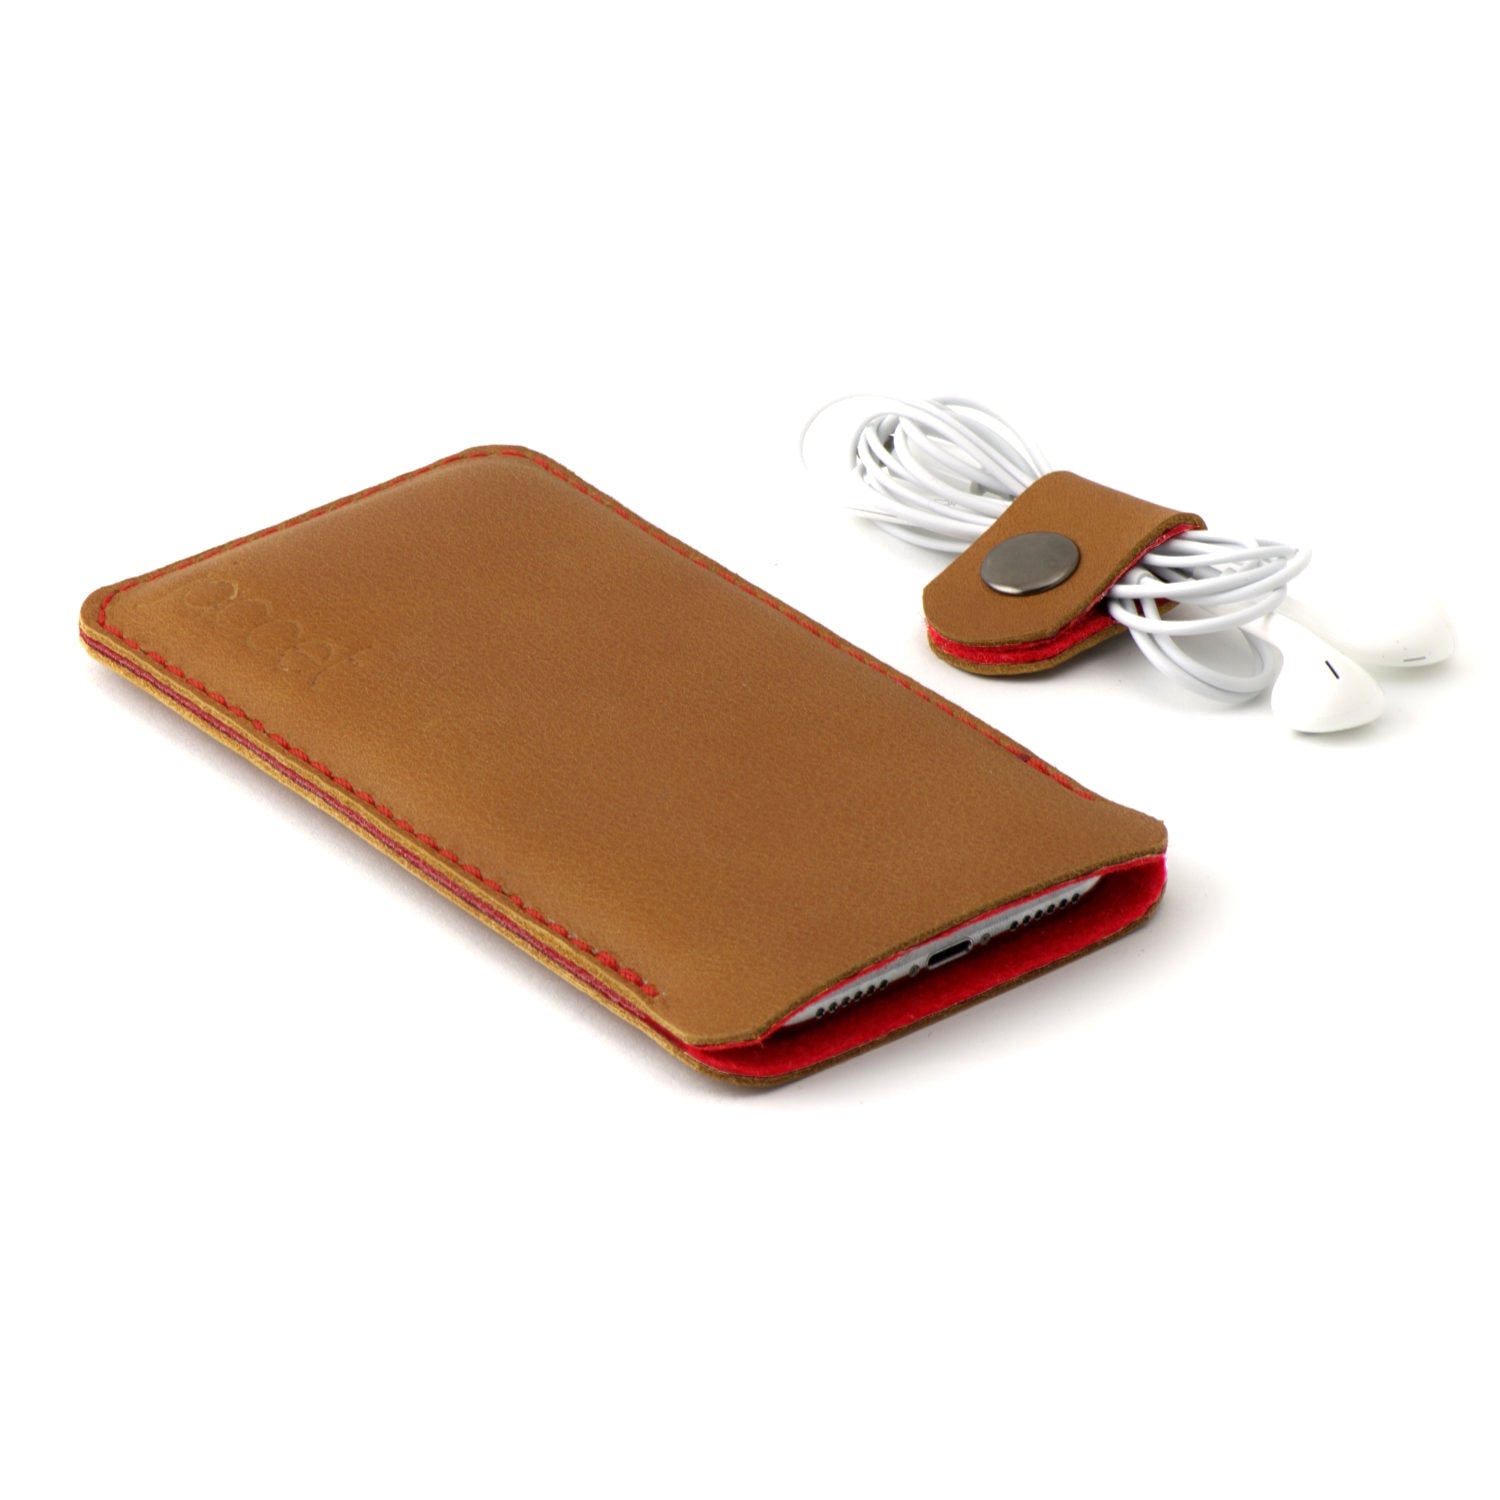 JACCET leather Sony Xperia sleeve - Cognac color leather with red wool felt - 100% Handmade